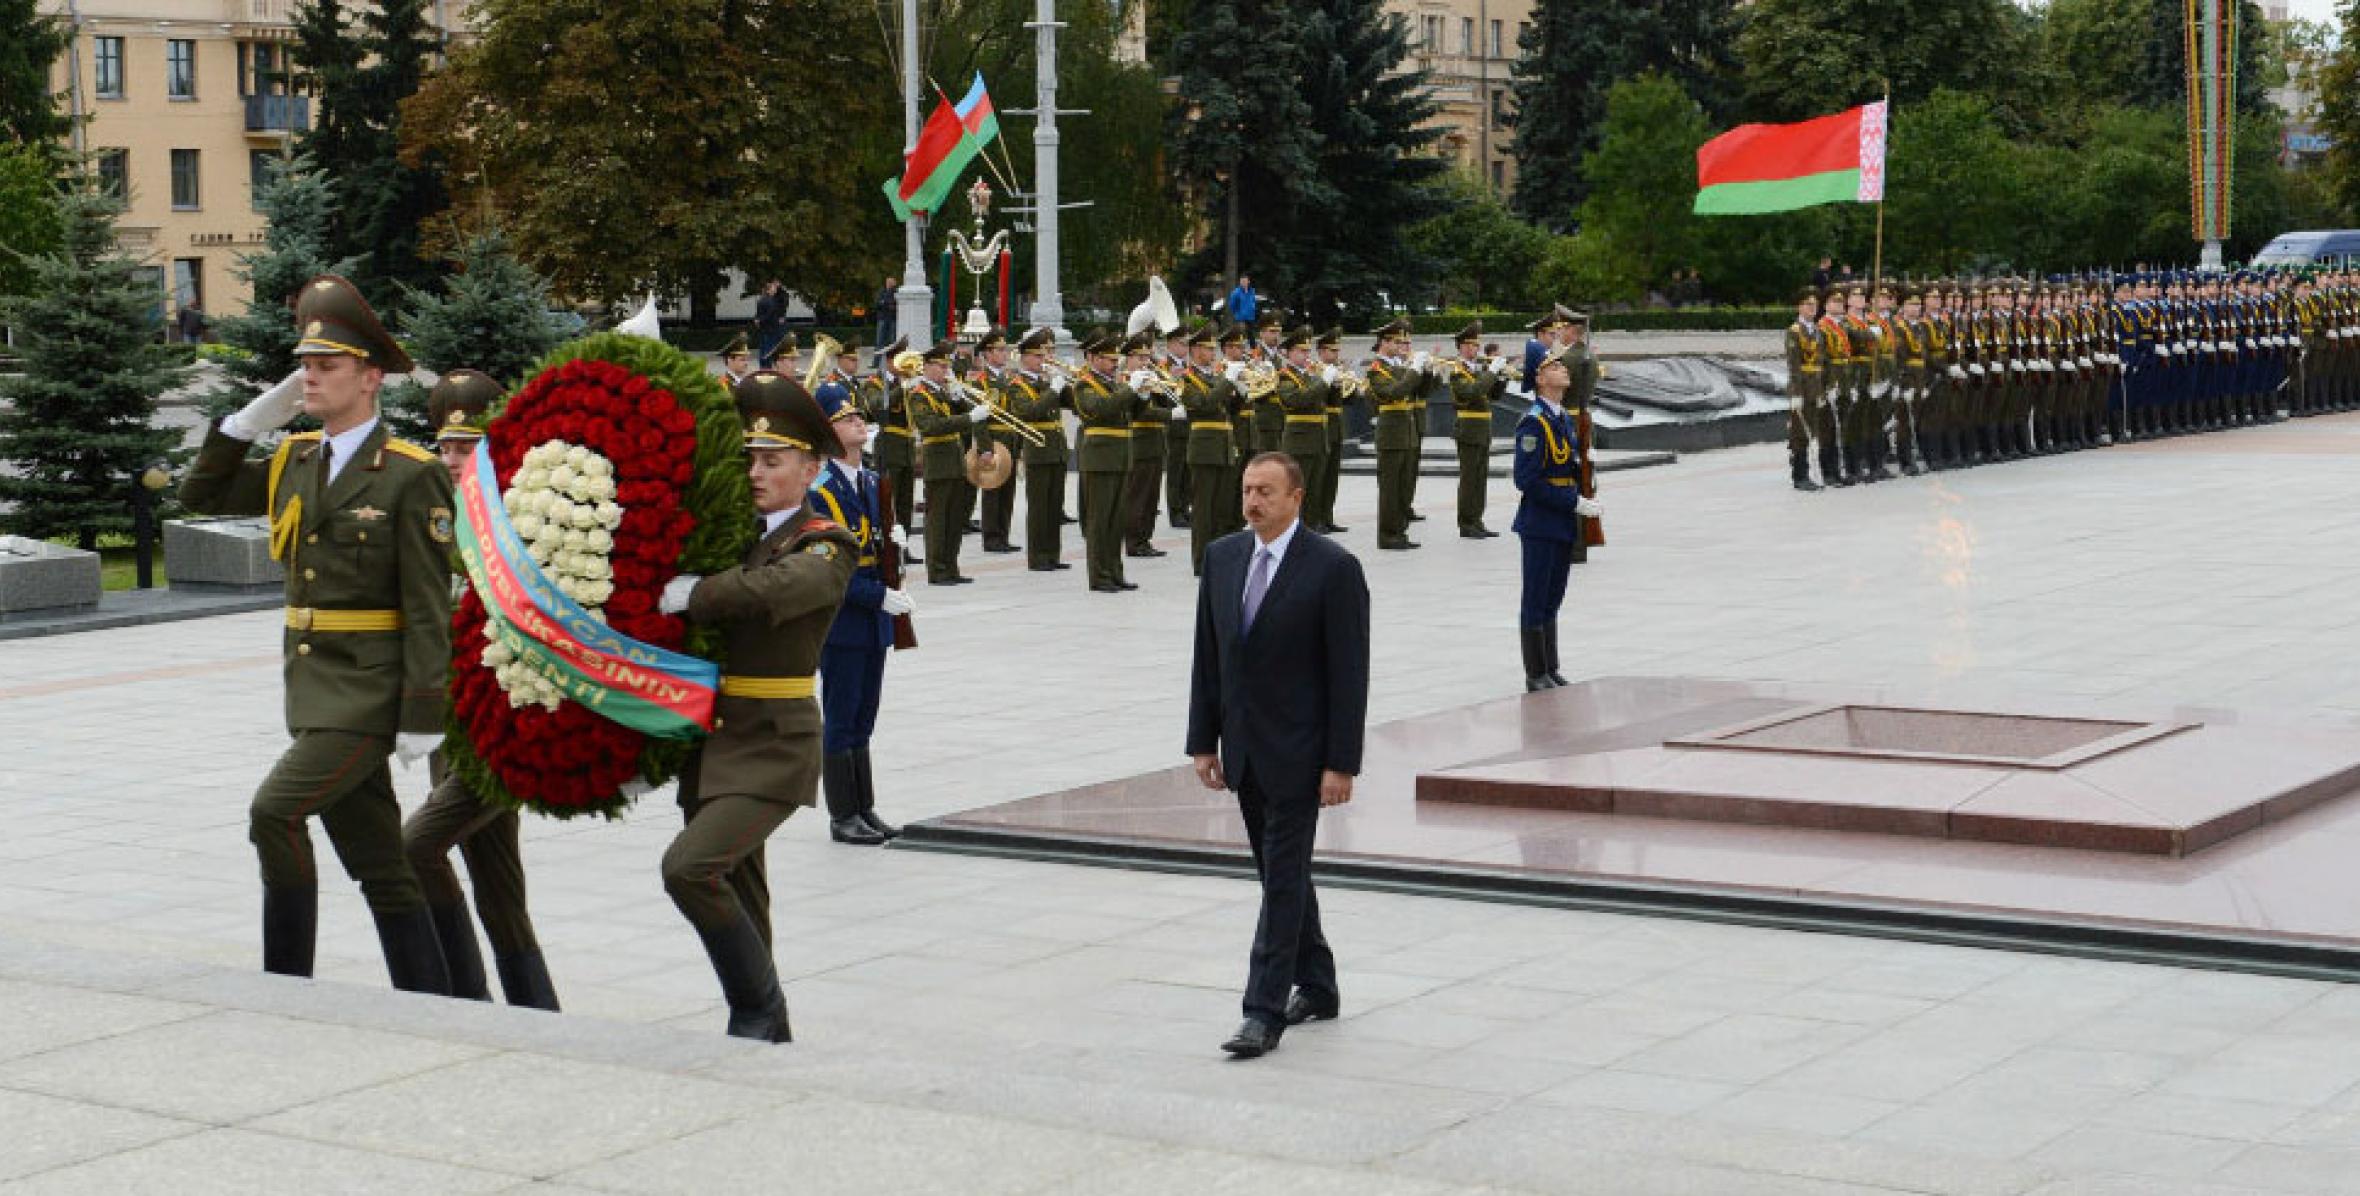 Ilham Aliyev visited the Victory Square in Minsk